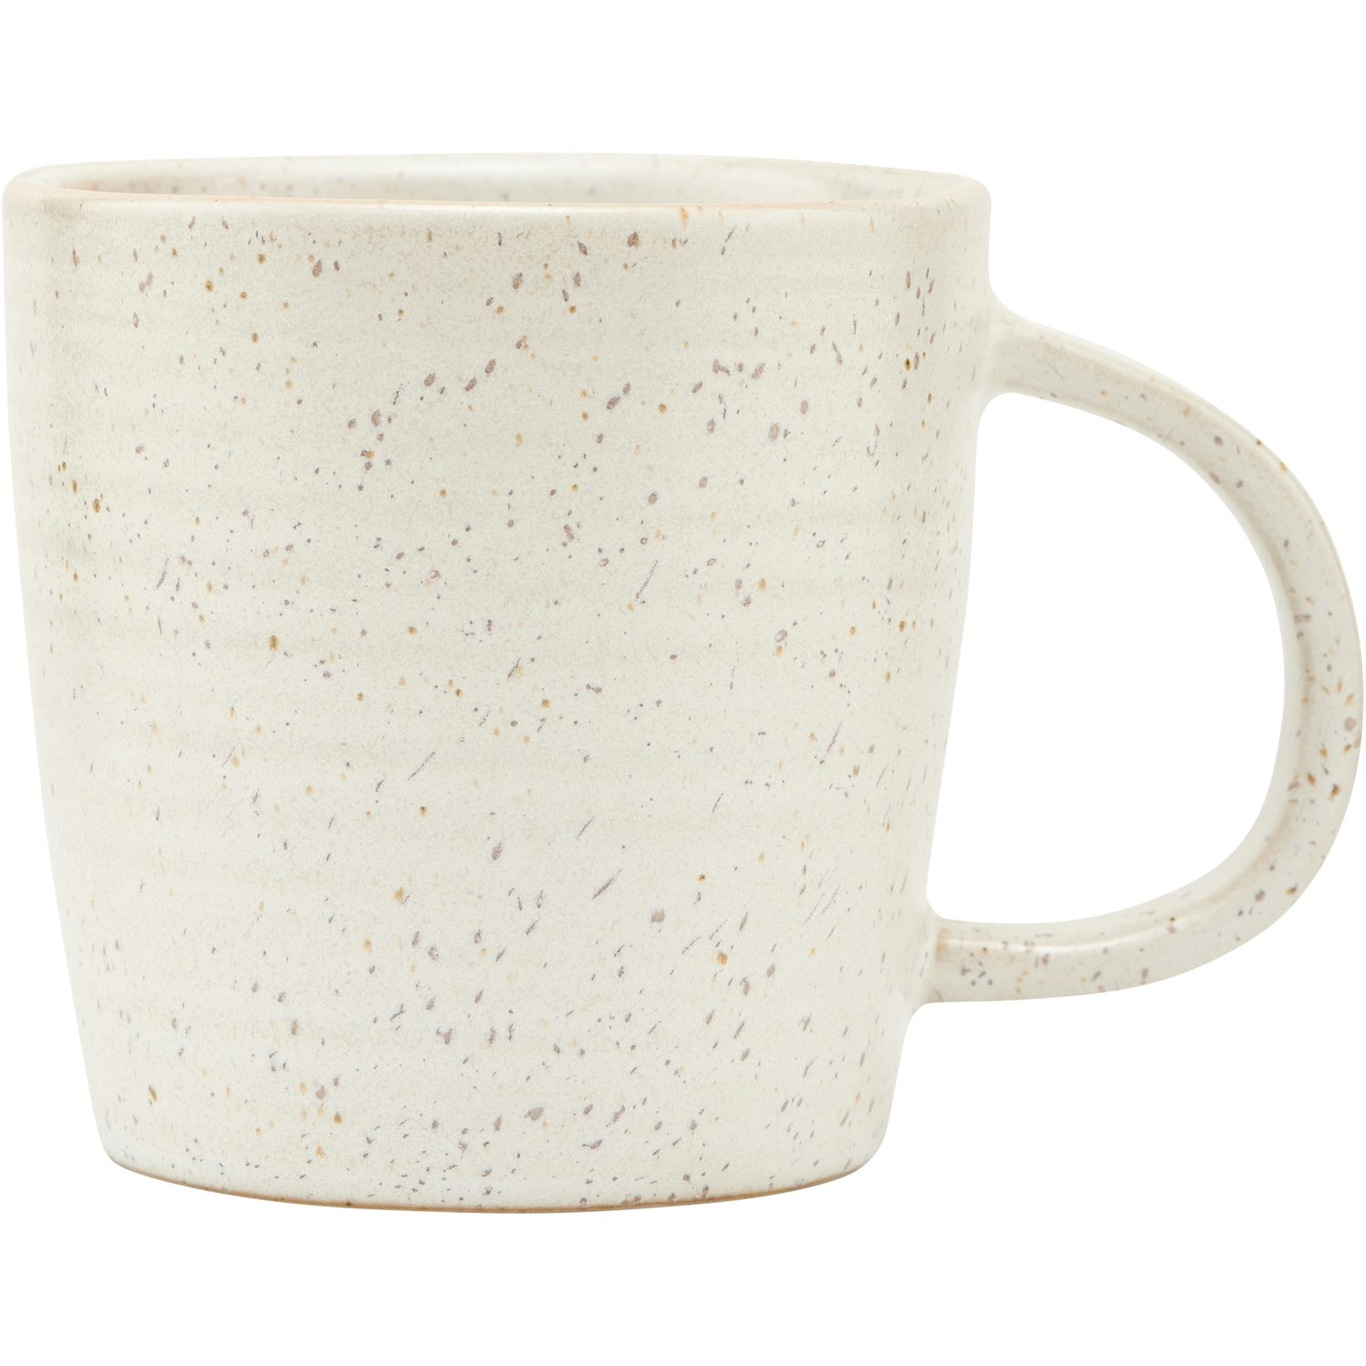 Pion Coffee Cup, White / Grey